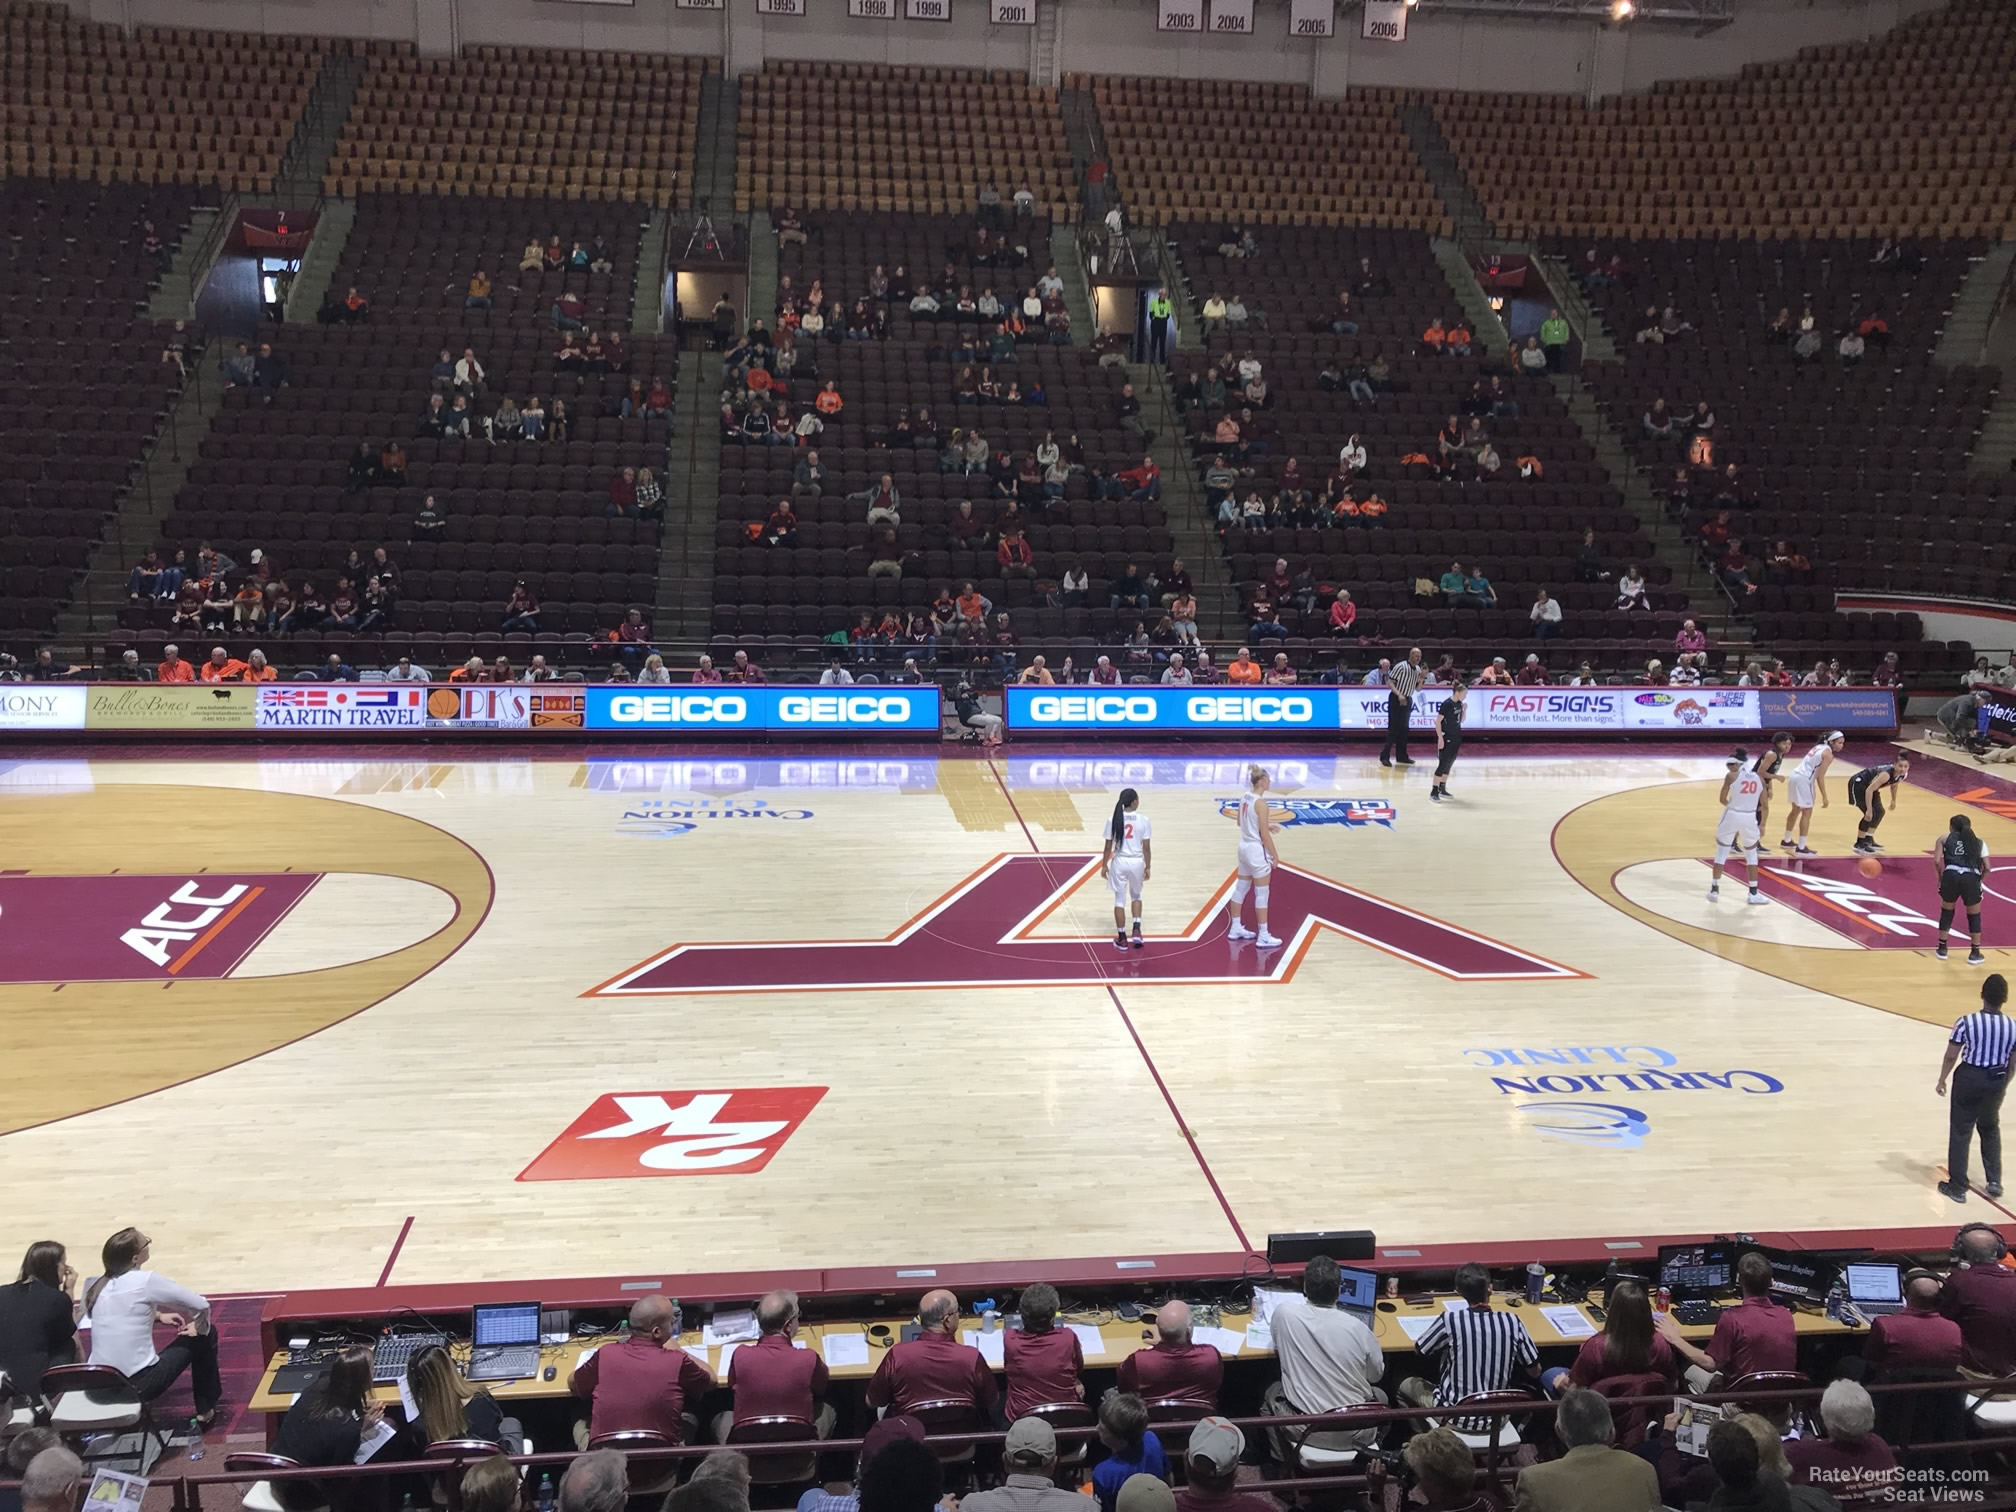 section 8, row h seat view  - cassell coliseum